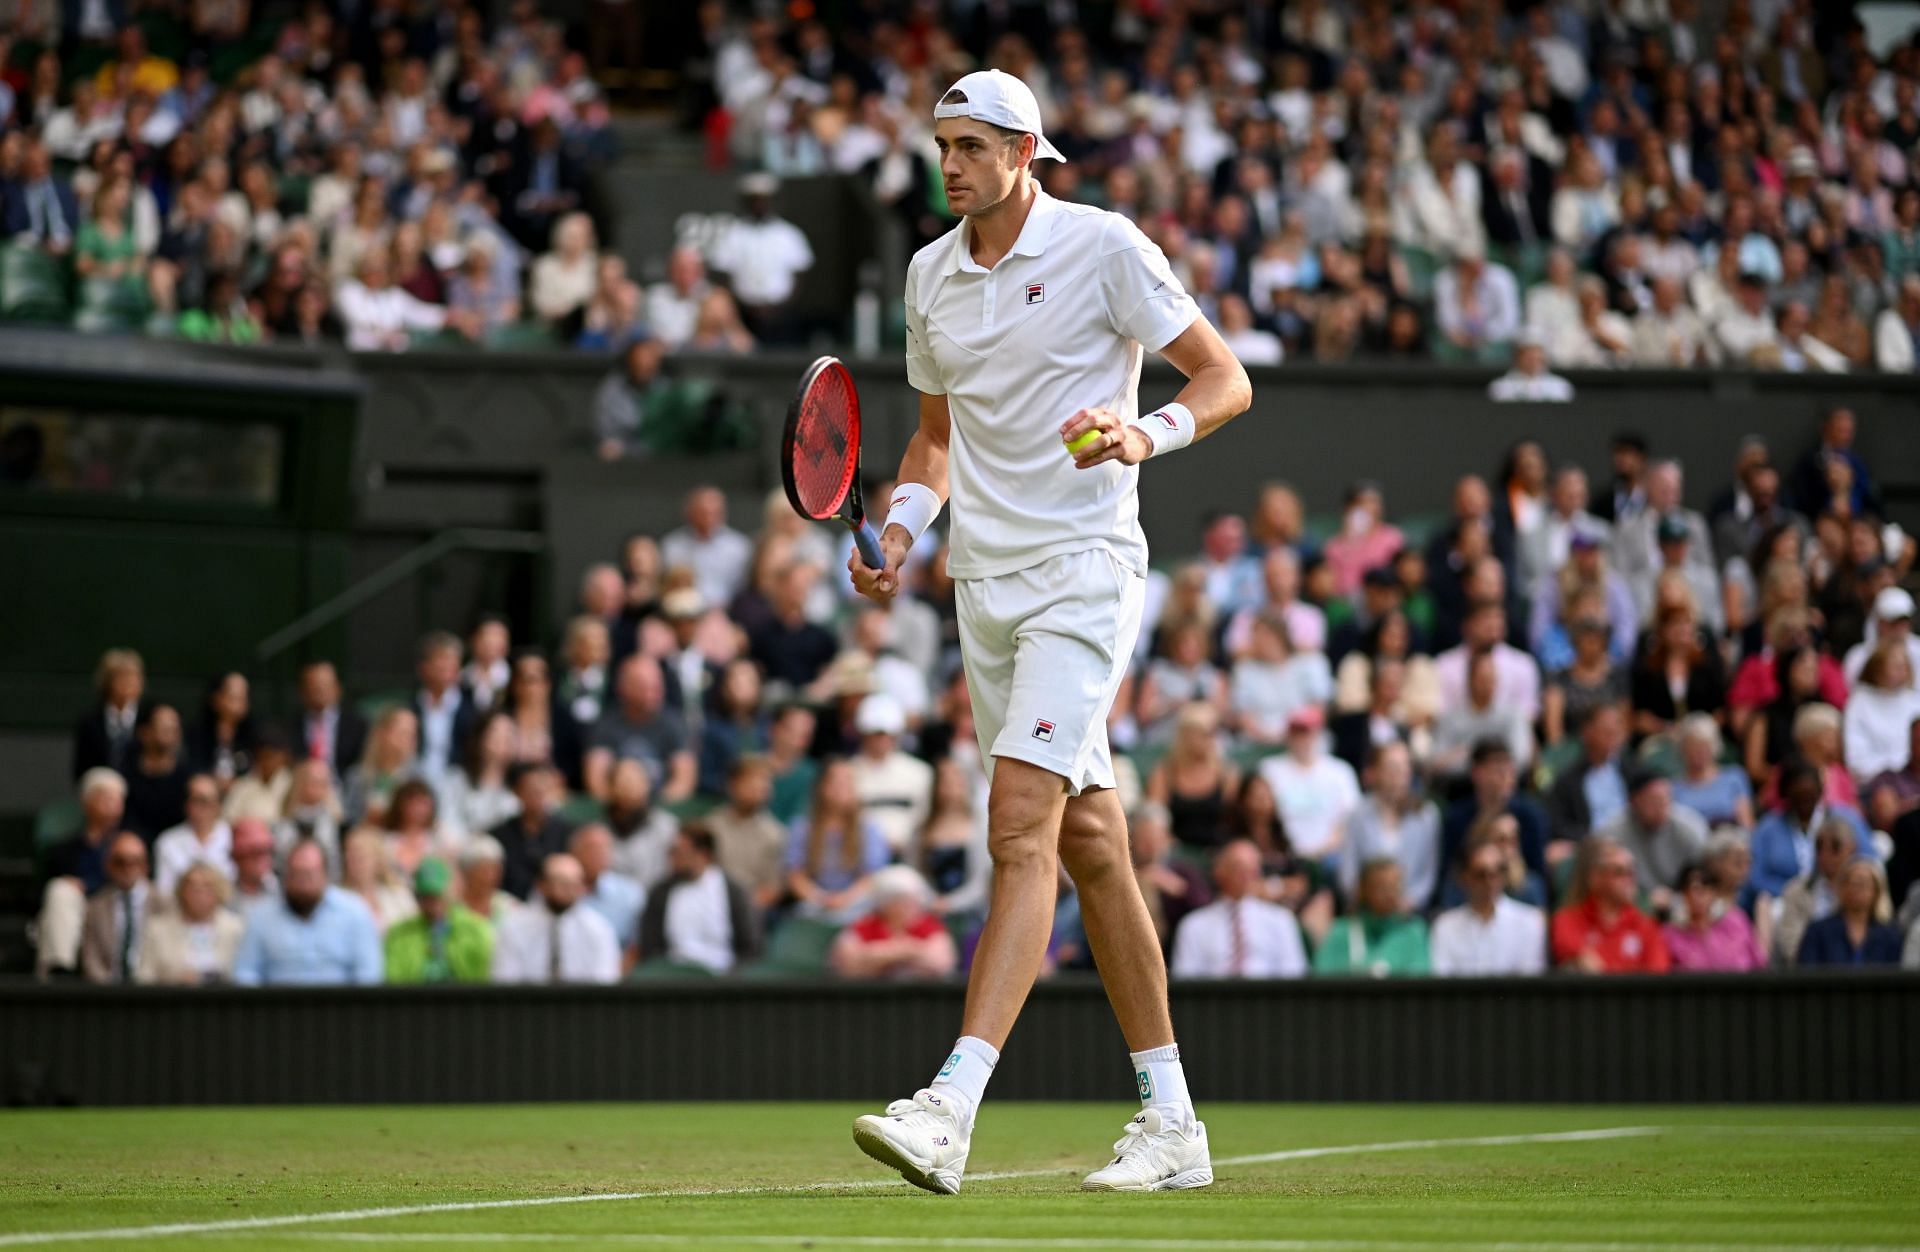 Newport 2022 John Isner vs Maxime Cressy preview, head-to-head, prediction, odds and pick Hall of Fame Open